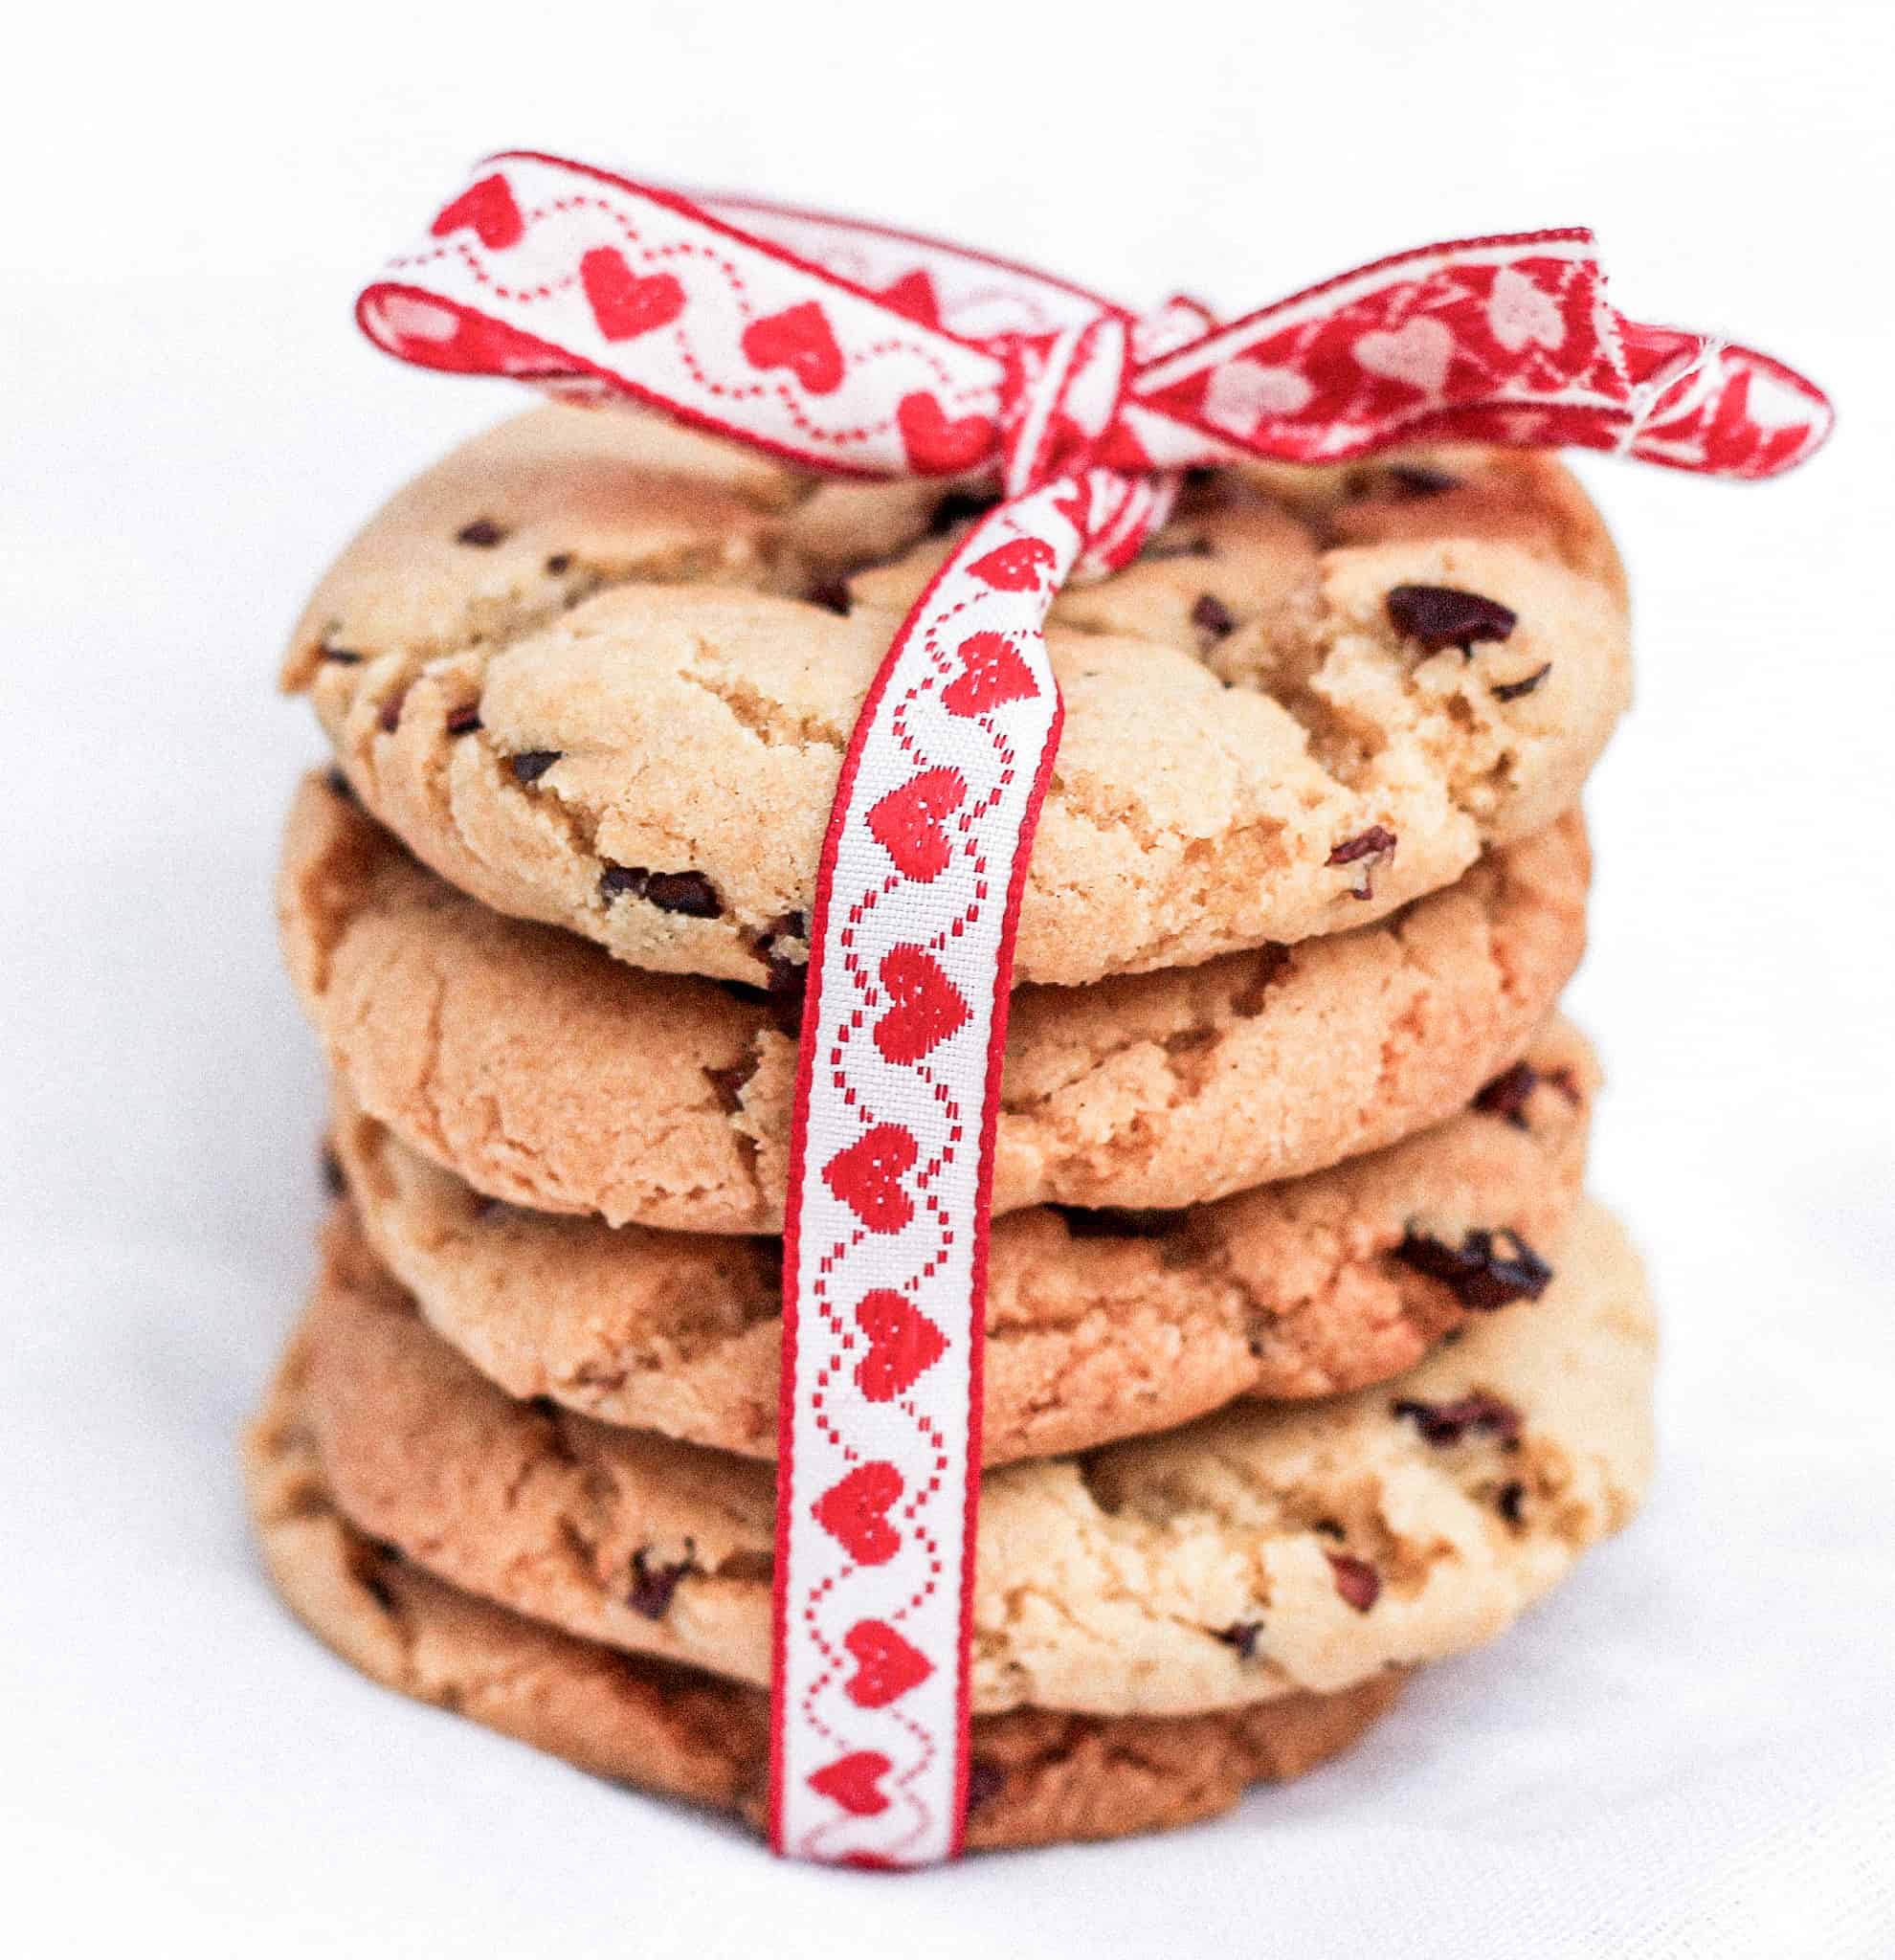 Cacao Nib Cookies tied up with a ribbon for a gift.